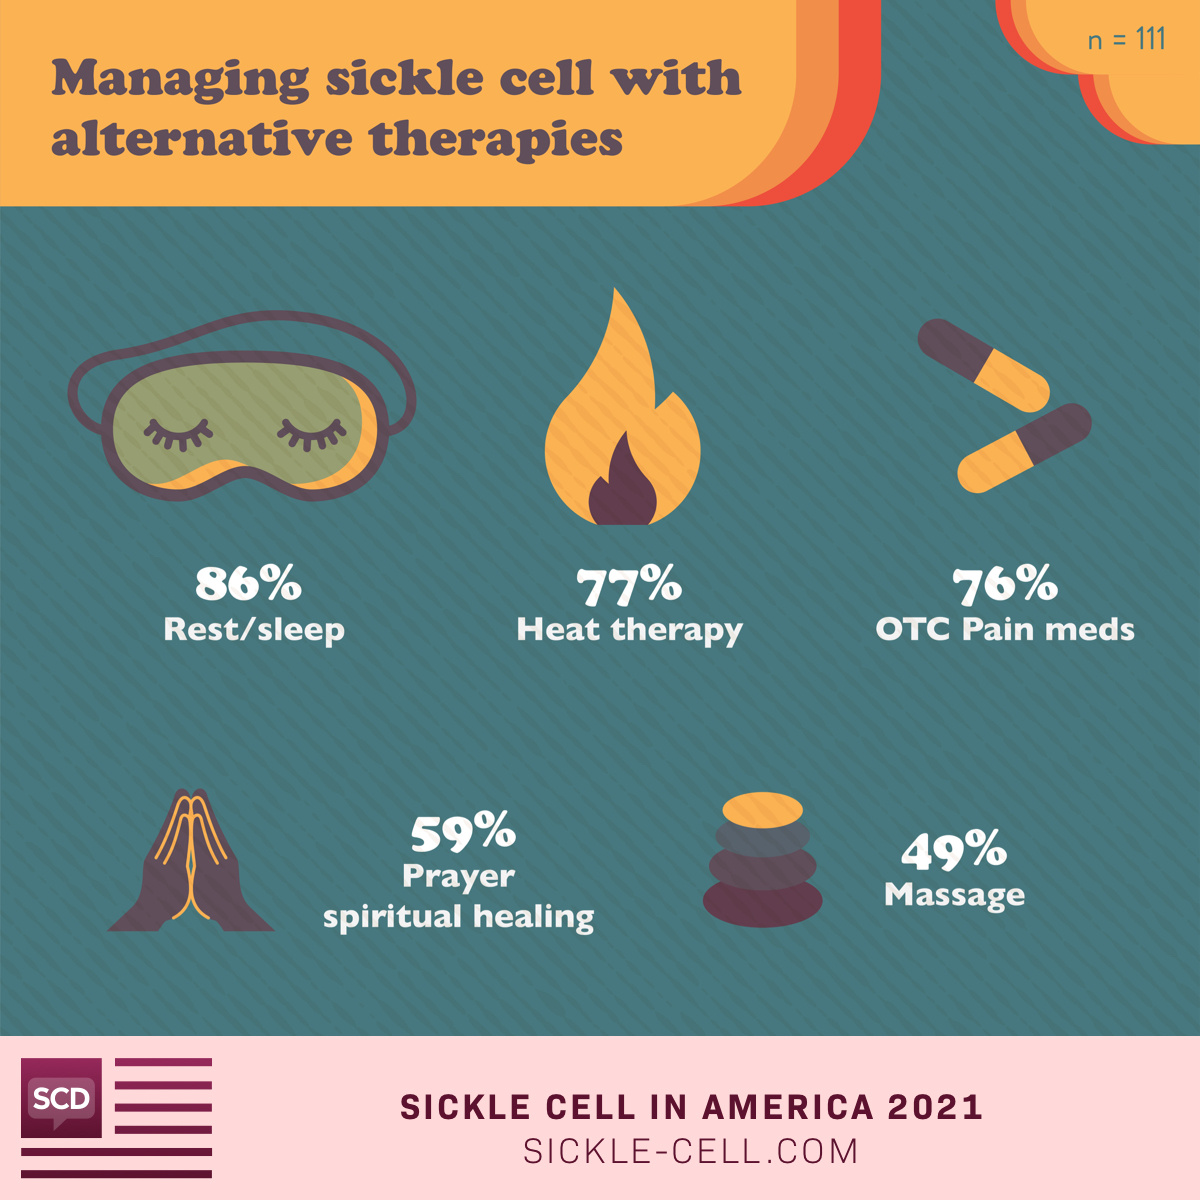 The most common alternative therapies for managing sickle cell are rest/sleep, heat therapy, over-the-counter pain meds, prayer/spiritual healing, and massage.